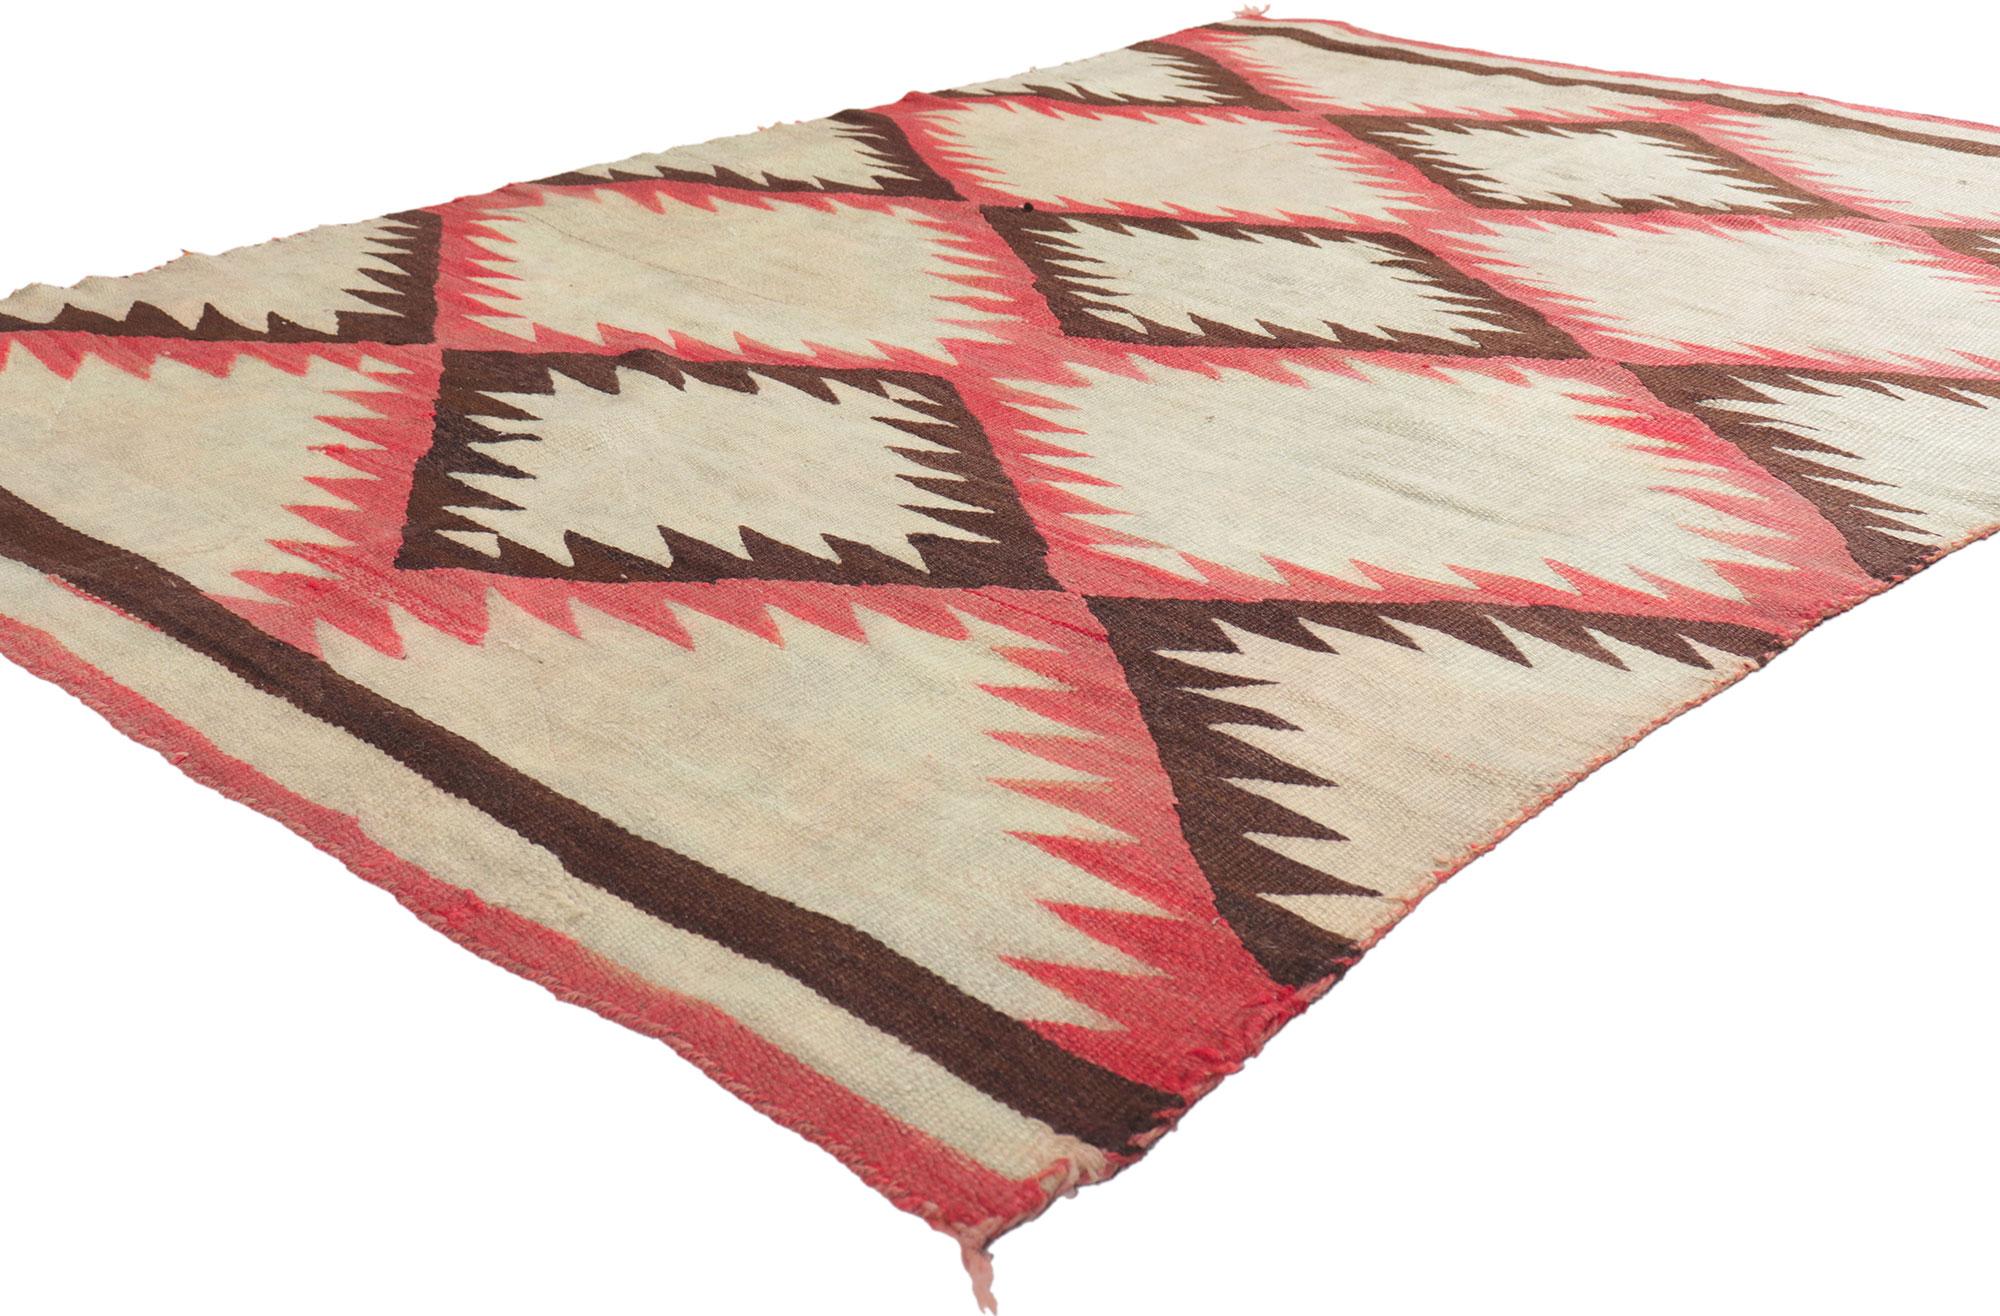 78429 Vintage eye dazzler navajo rug, 04'09 x 07'00. With its incredible detail and texture, this handwoven vintage Navajo rug is a captivating vision of woven beauty. The striking Eye Dazzler pattern and lively colorway woven into this Navajo rug